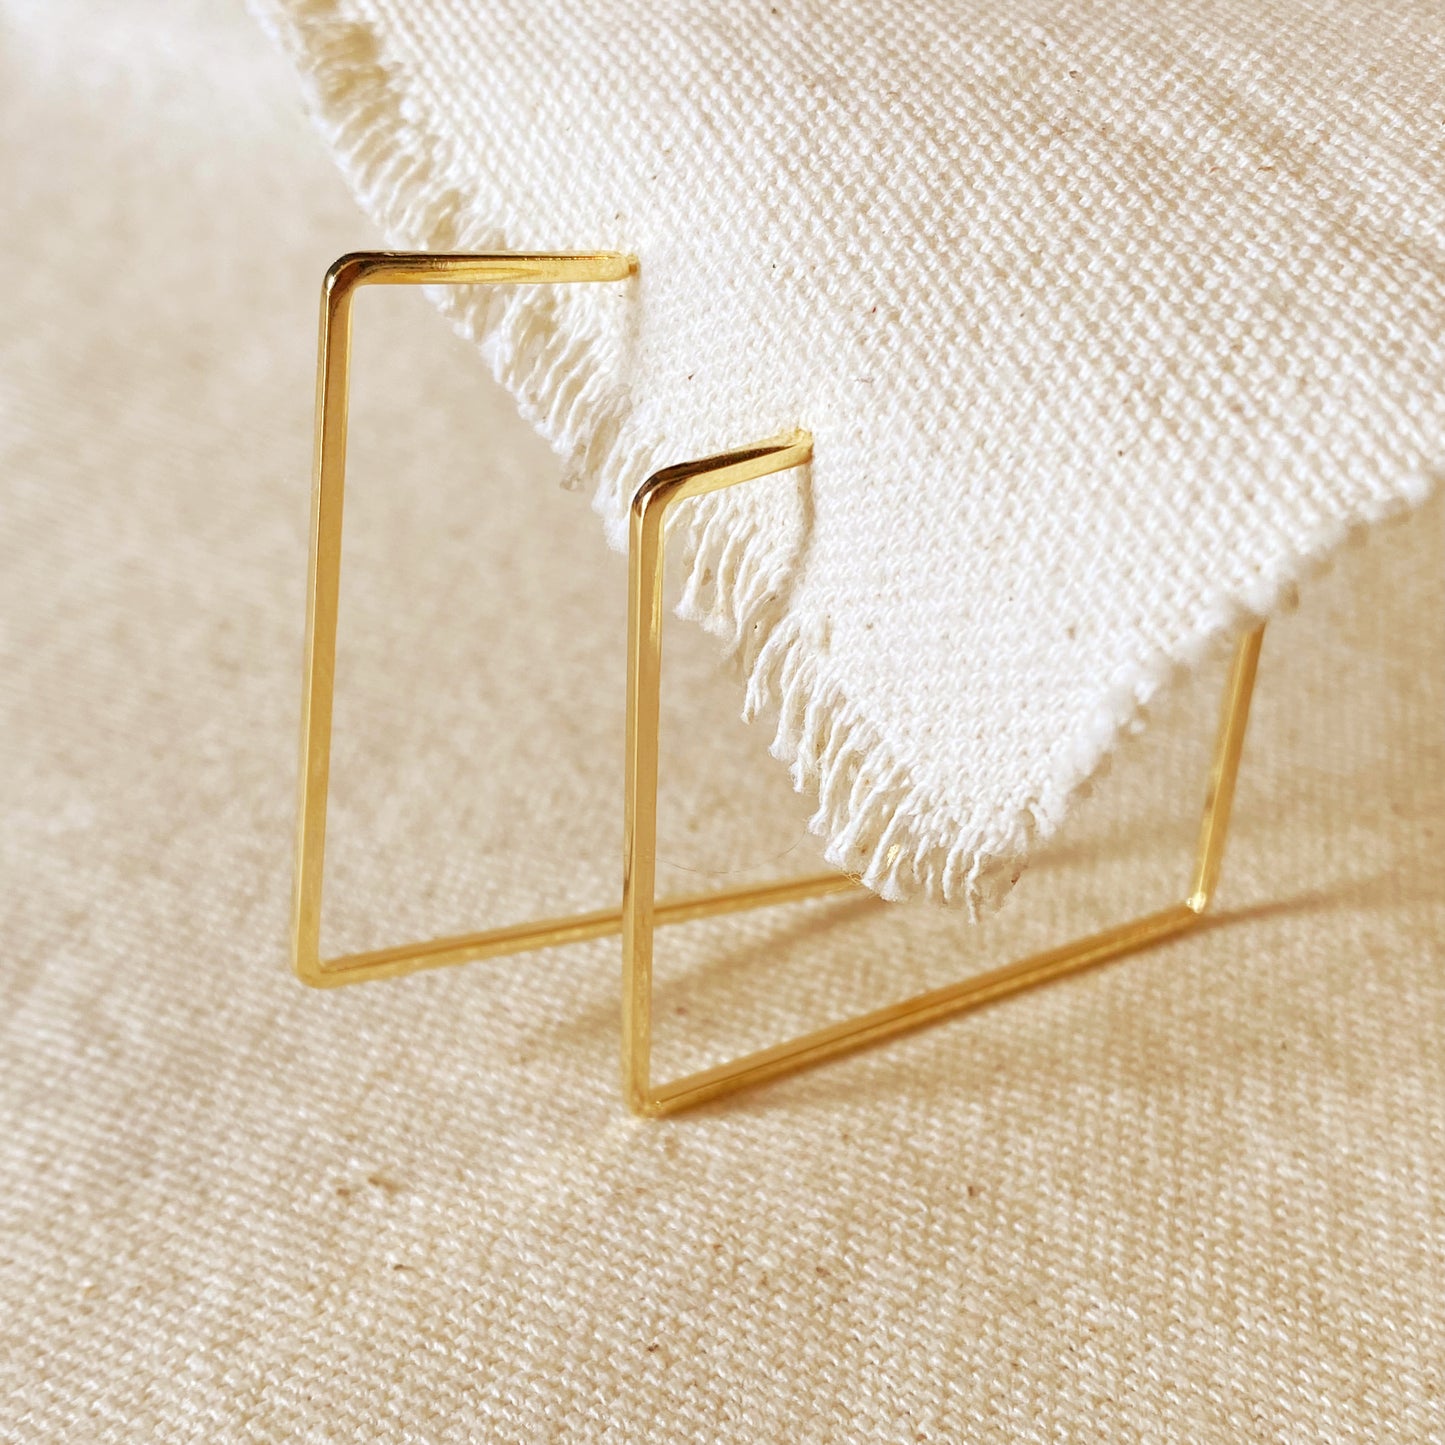 18k Gold Filled Square Shaped Wire Half Hoop Earrings